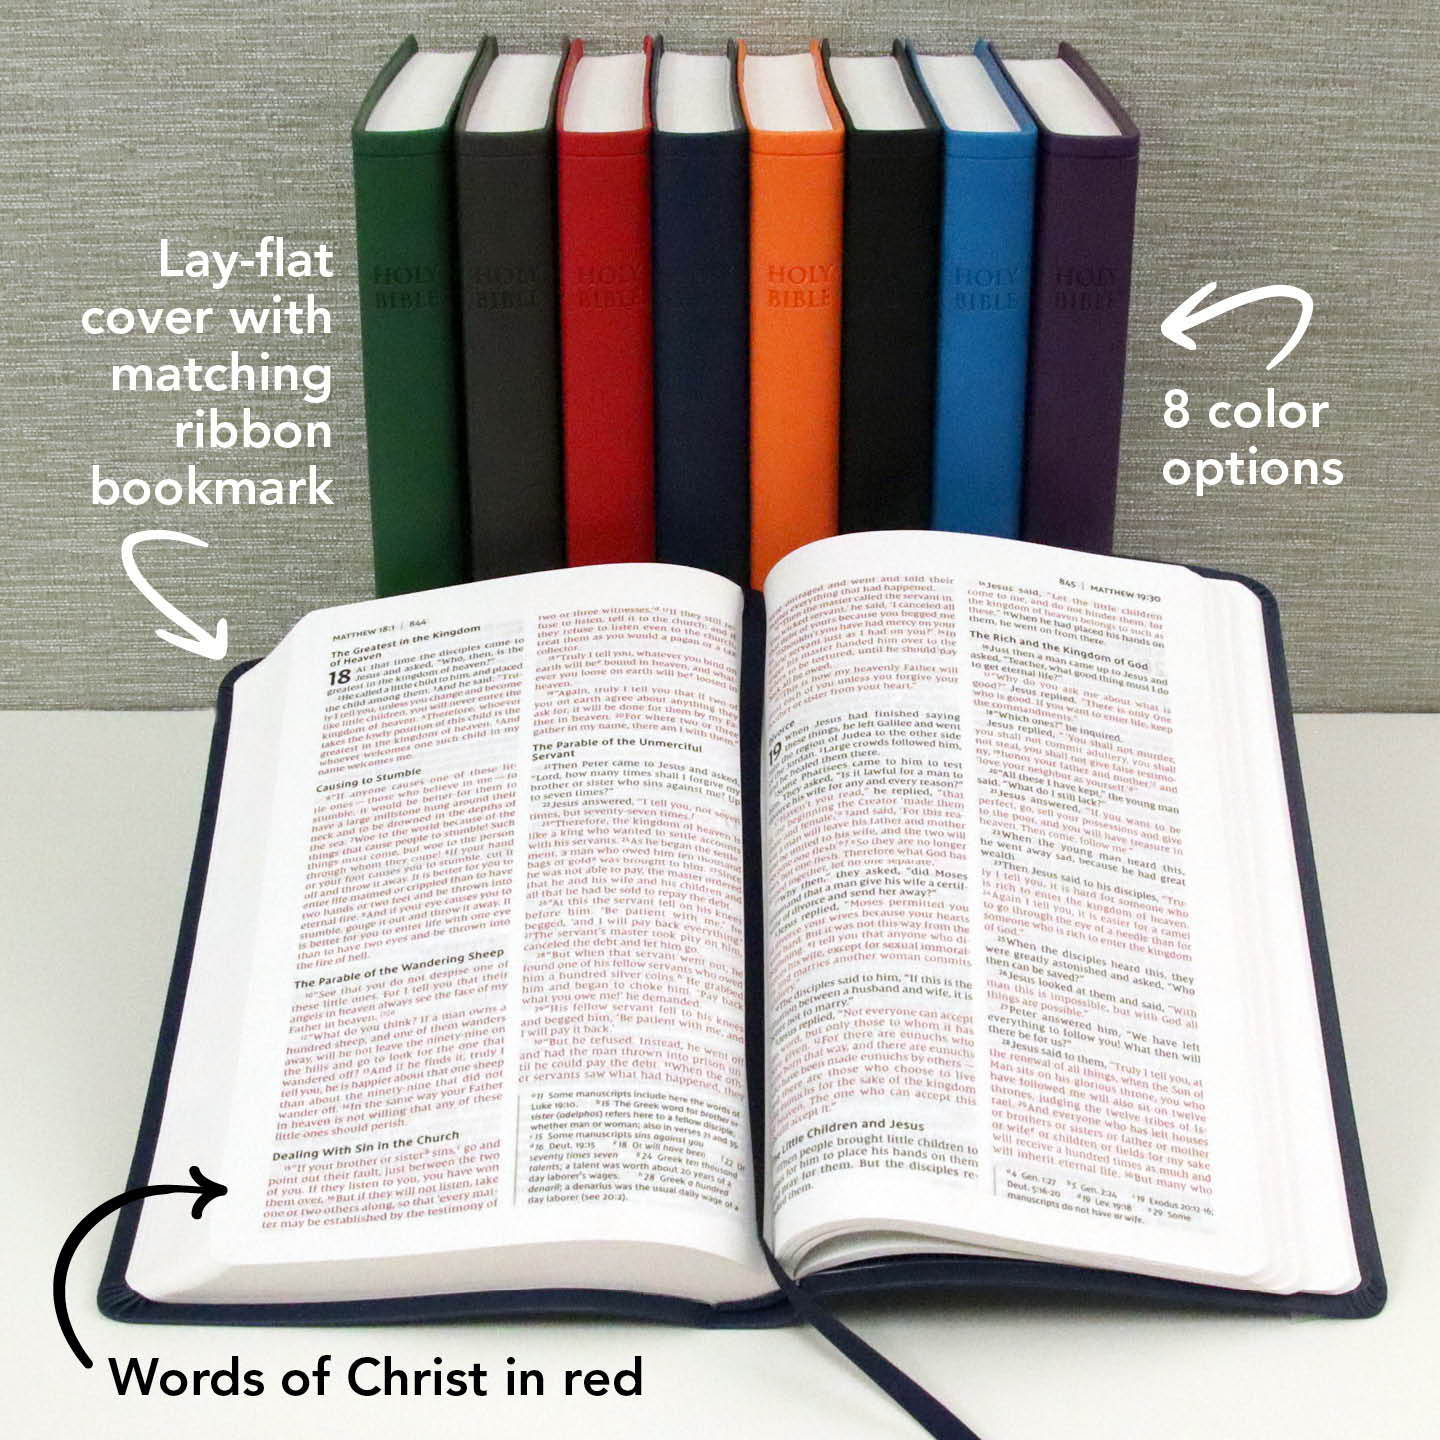 NIV Bible Builder - lay-flat cover with matching ribbon bookmark, 8 color options,  Words of Christ in red